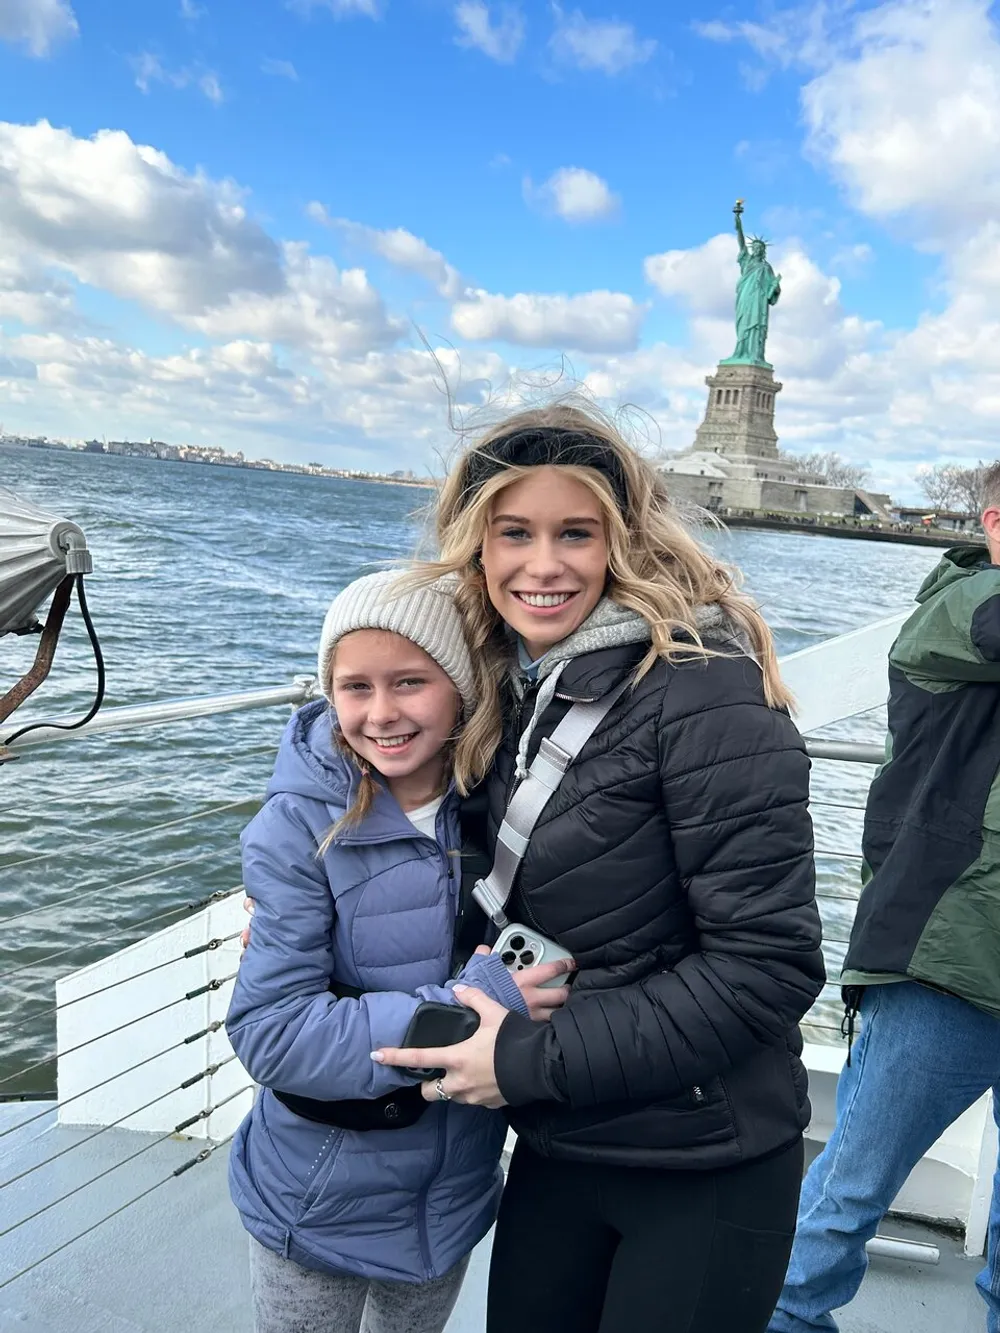 Two people are smiling for a photo on a boat with the Statue of Liberty in the background